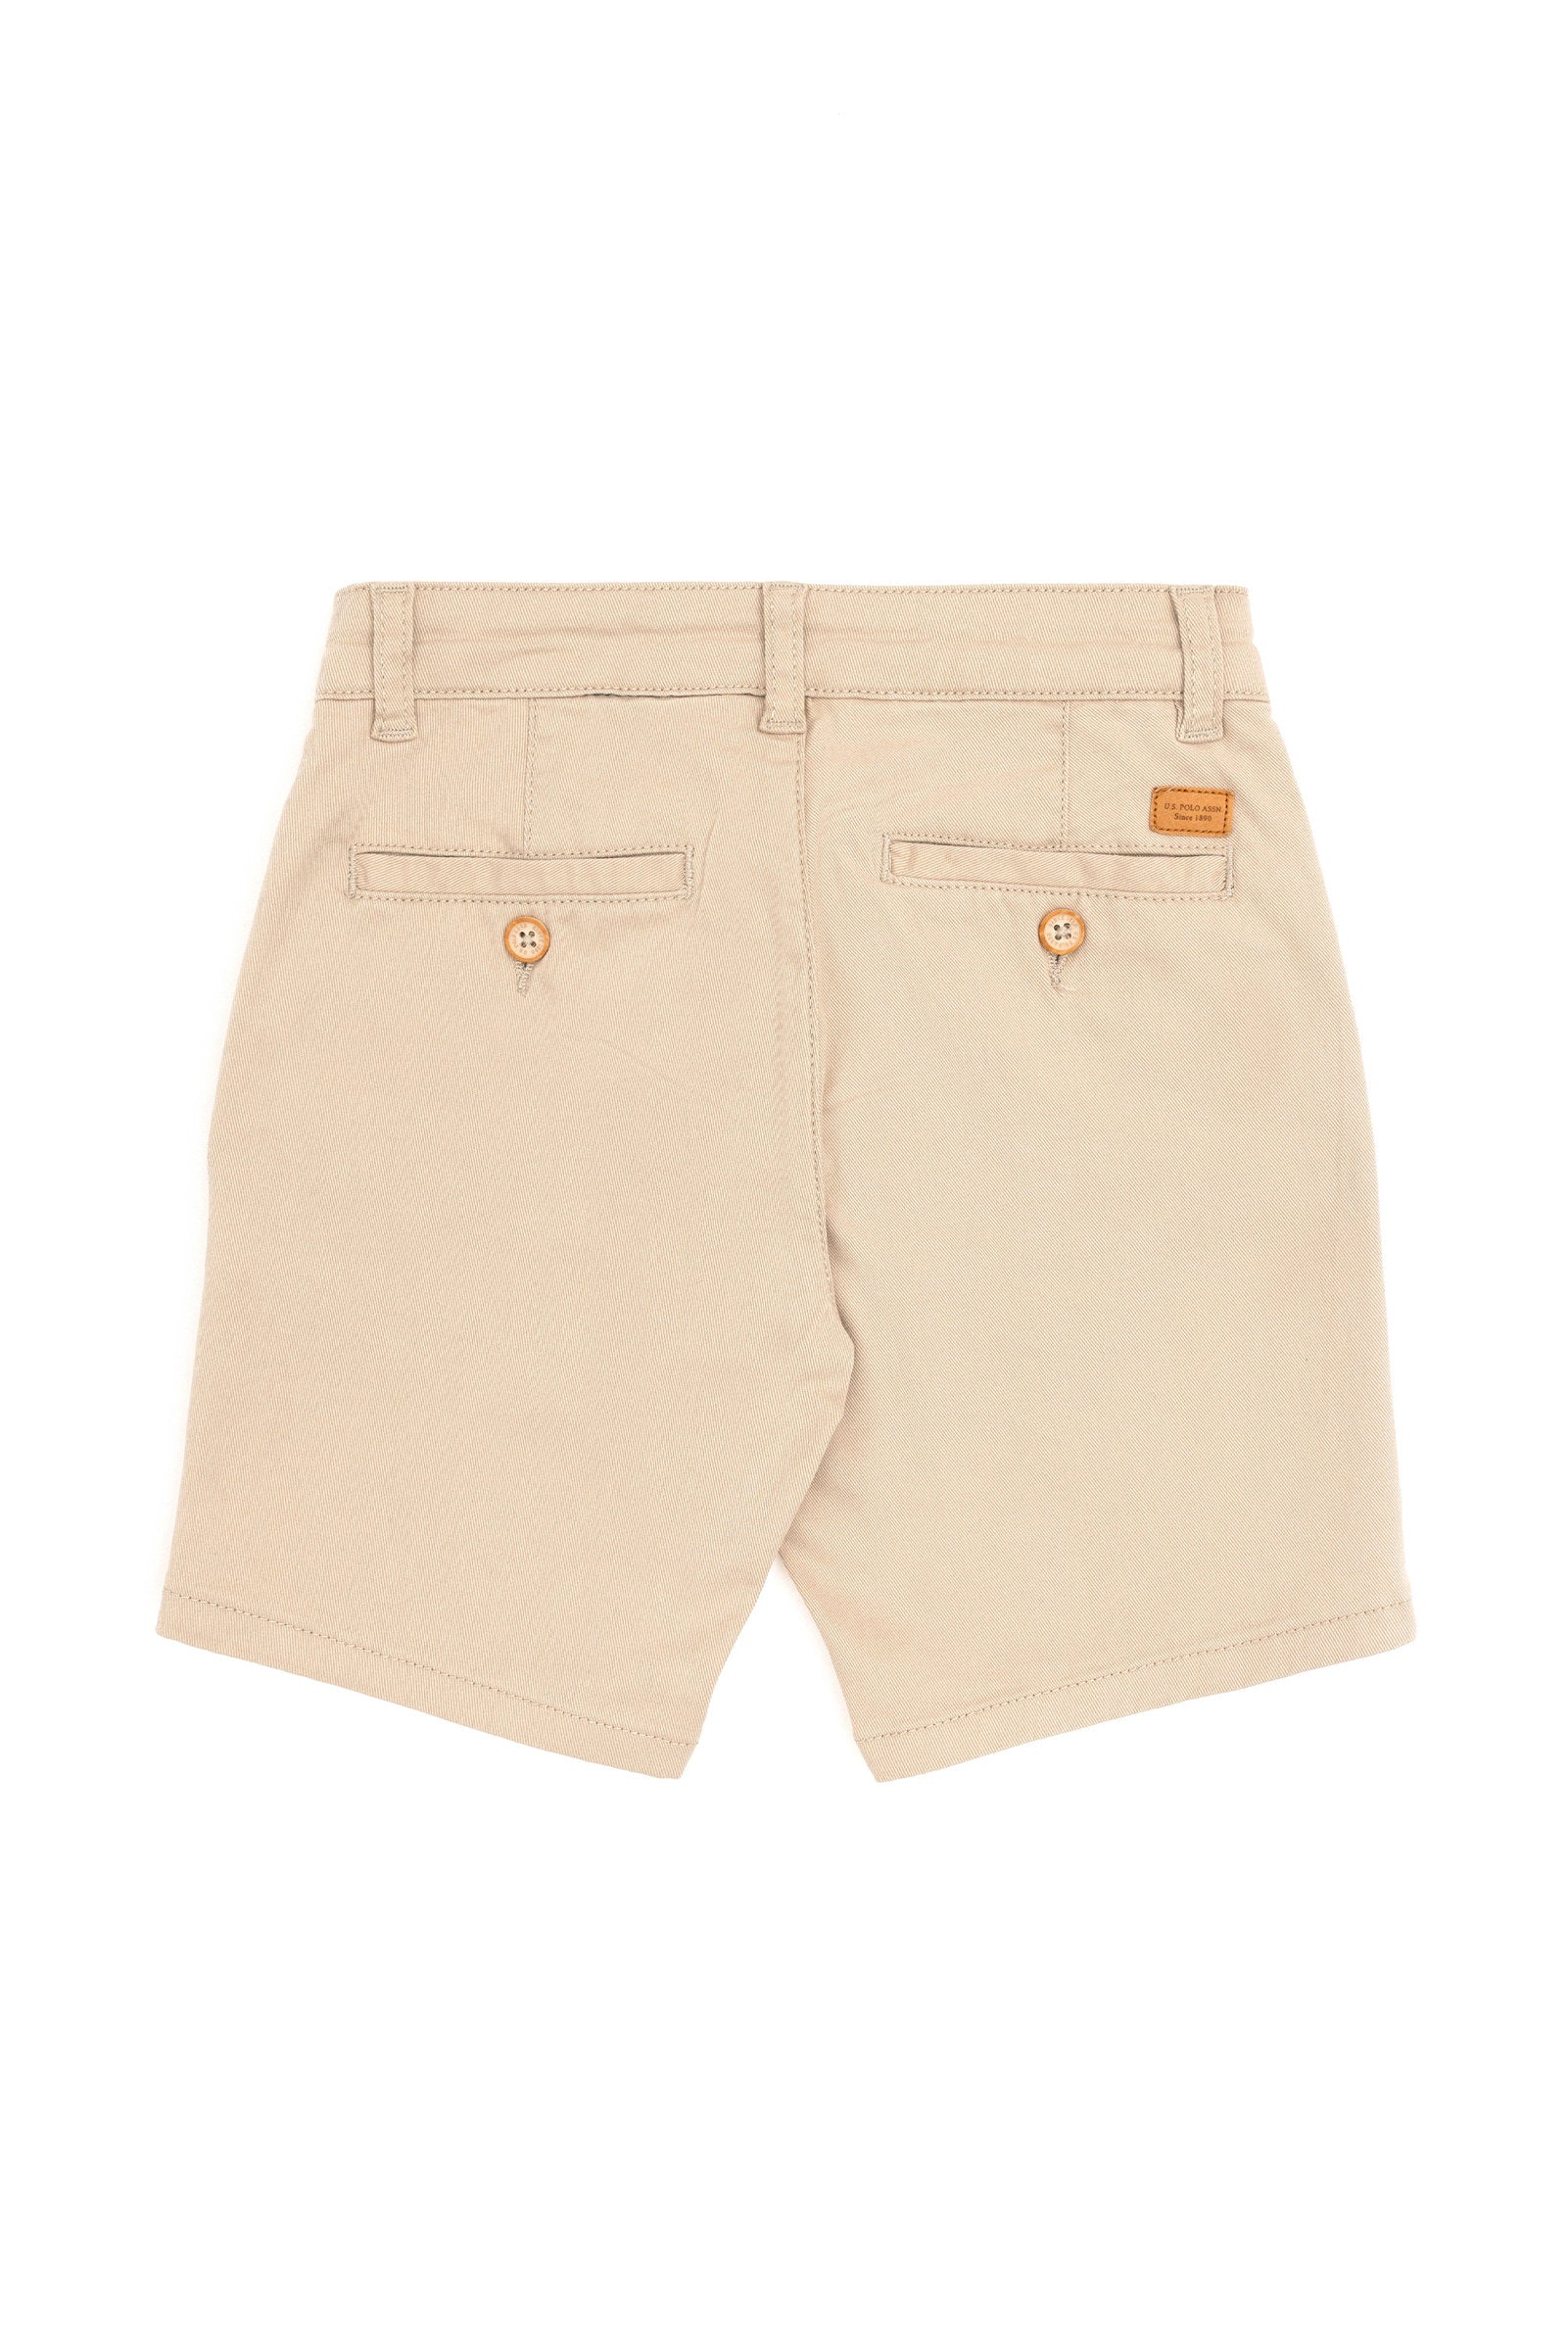 Fitted Chino Shorts_G083GL0310 1829783_VR049_03